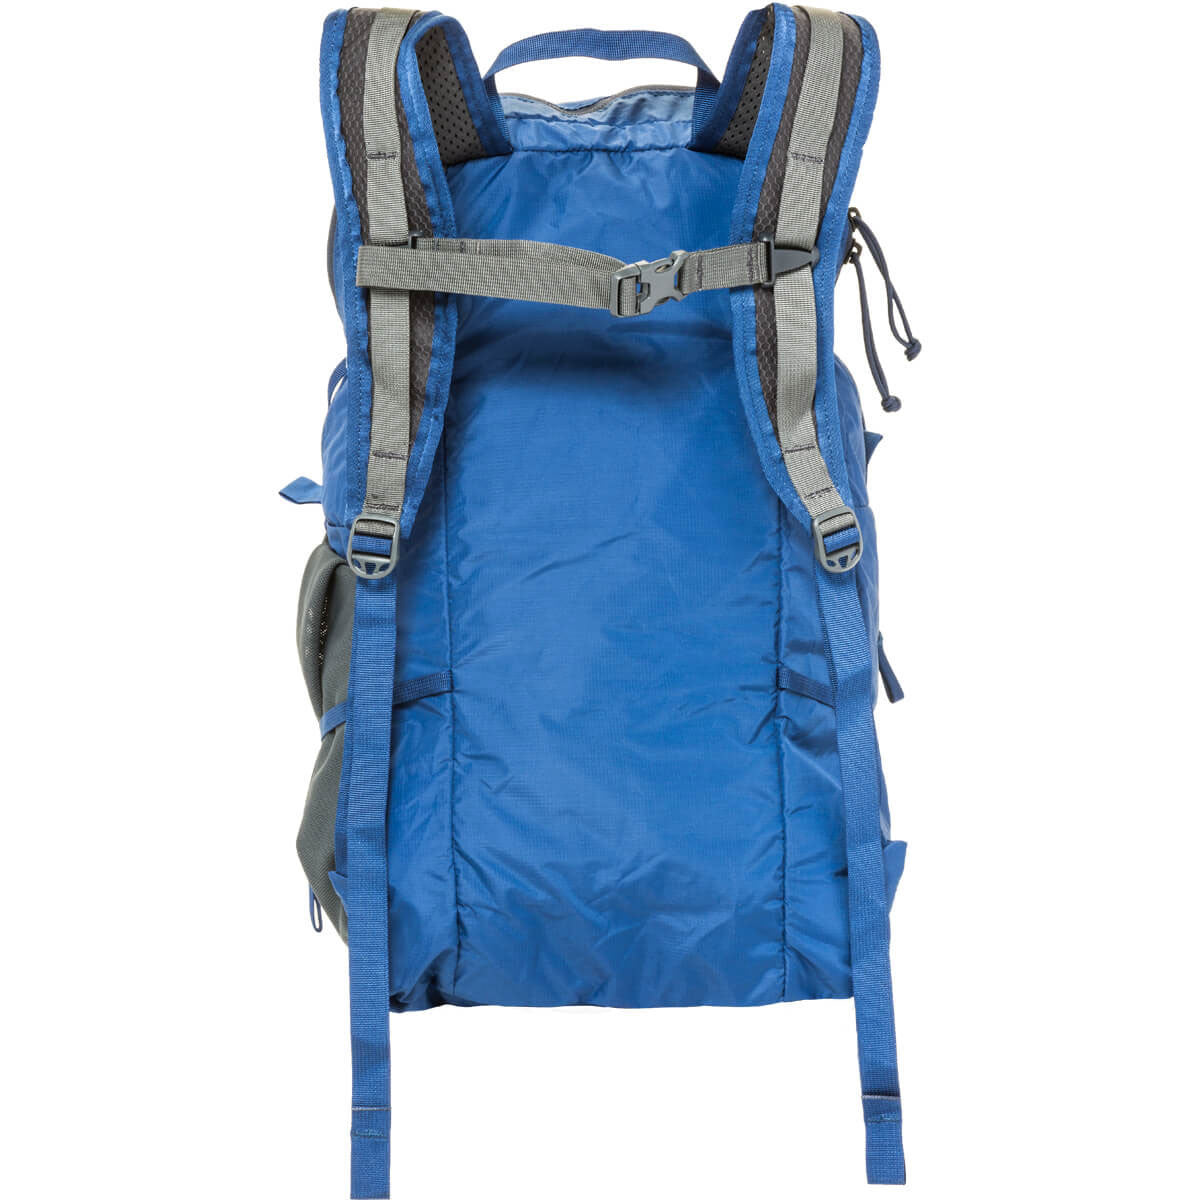 Mystery Ranch In and Out Packable BackPack